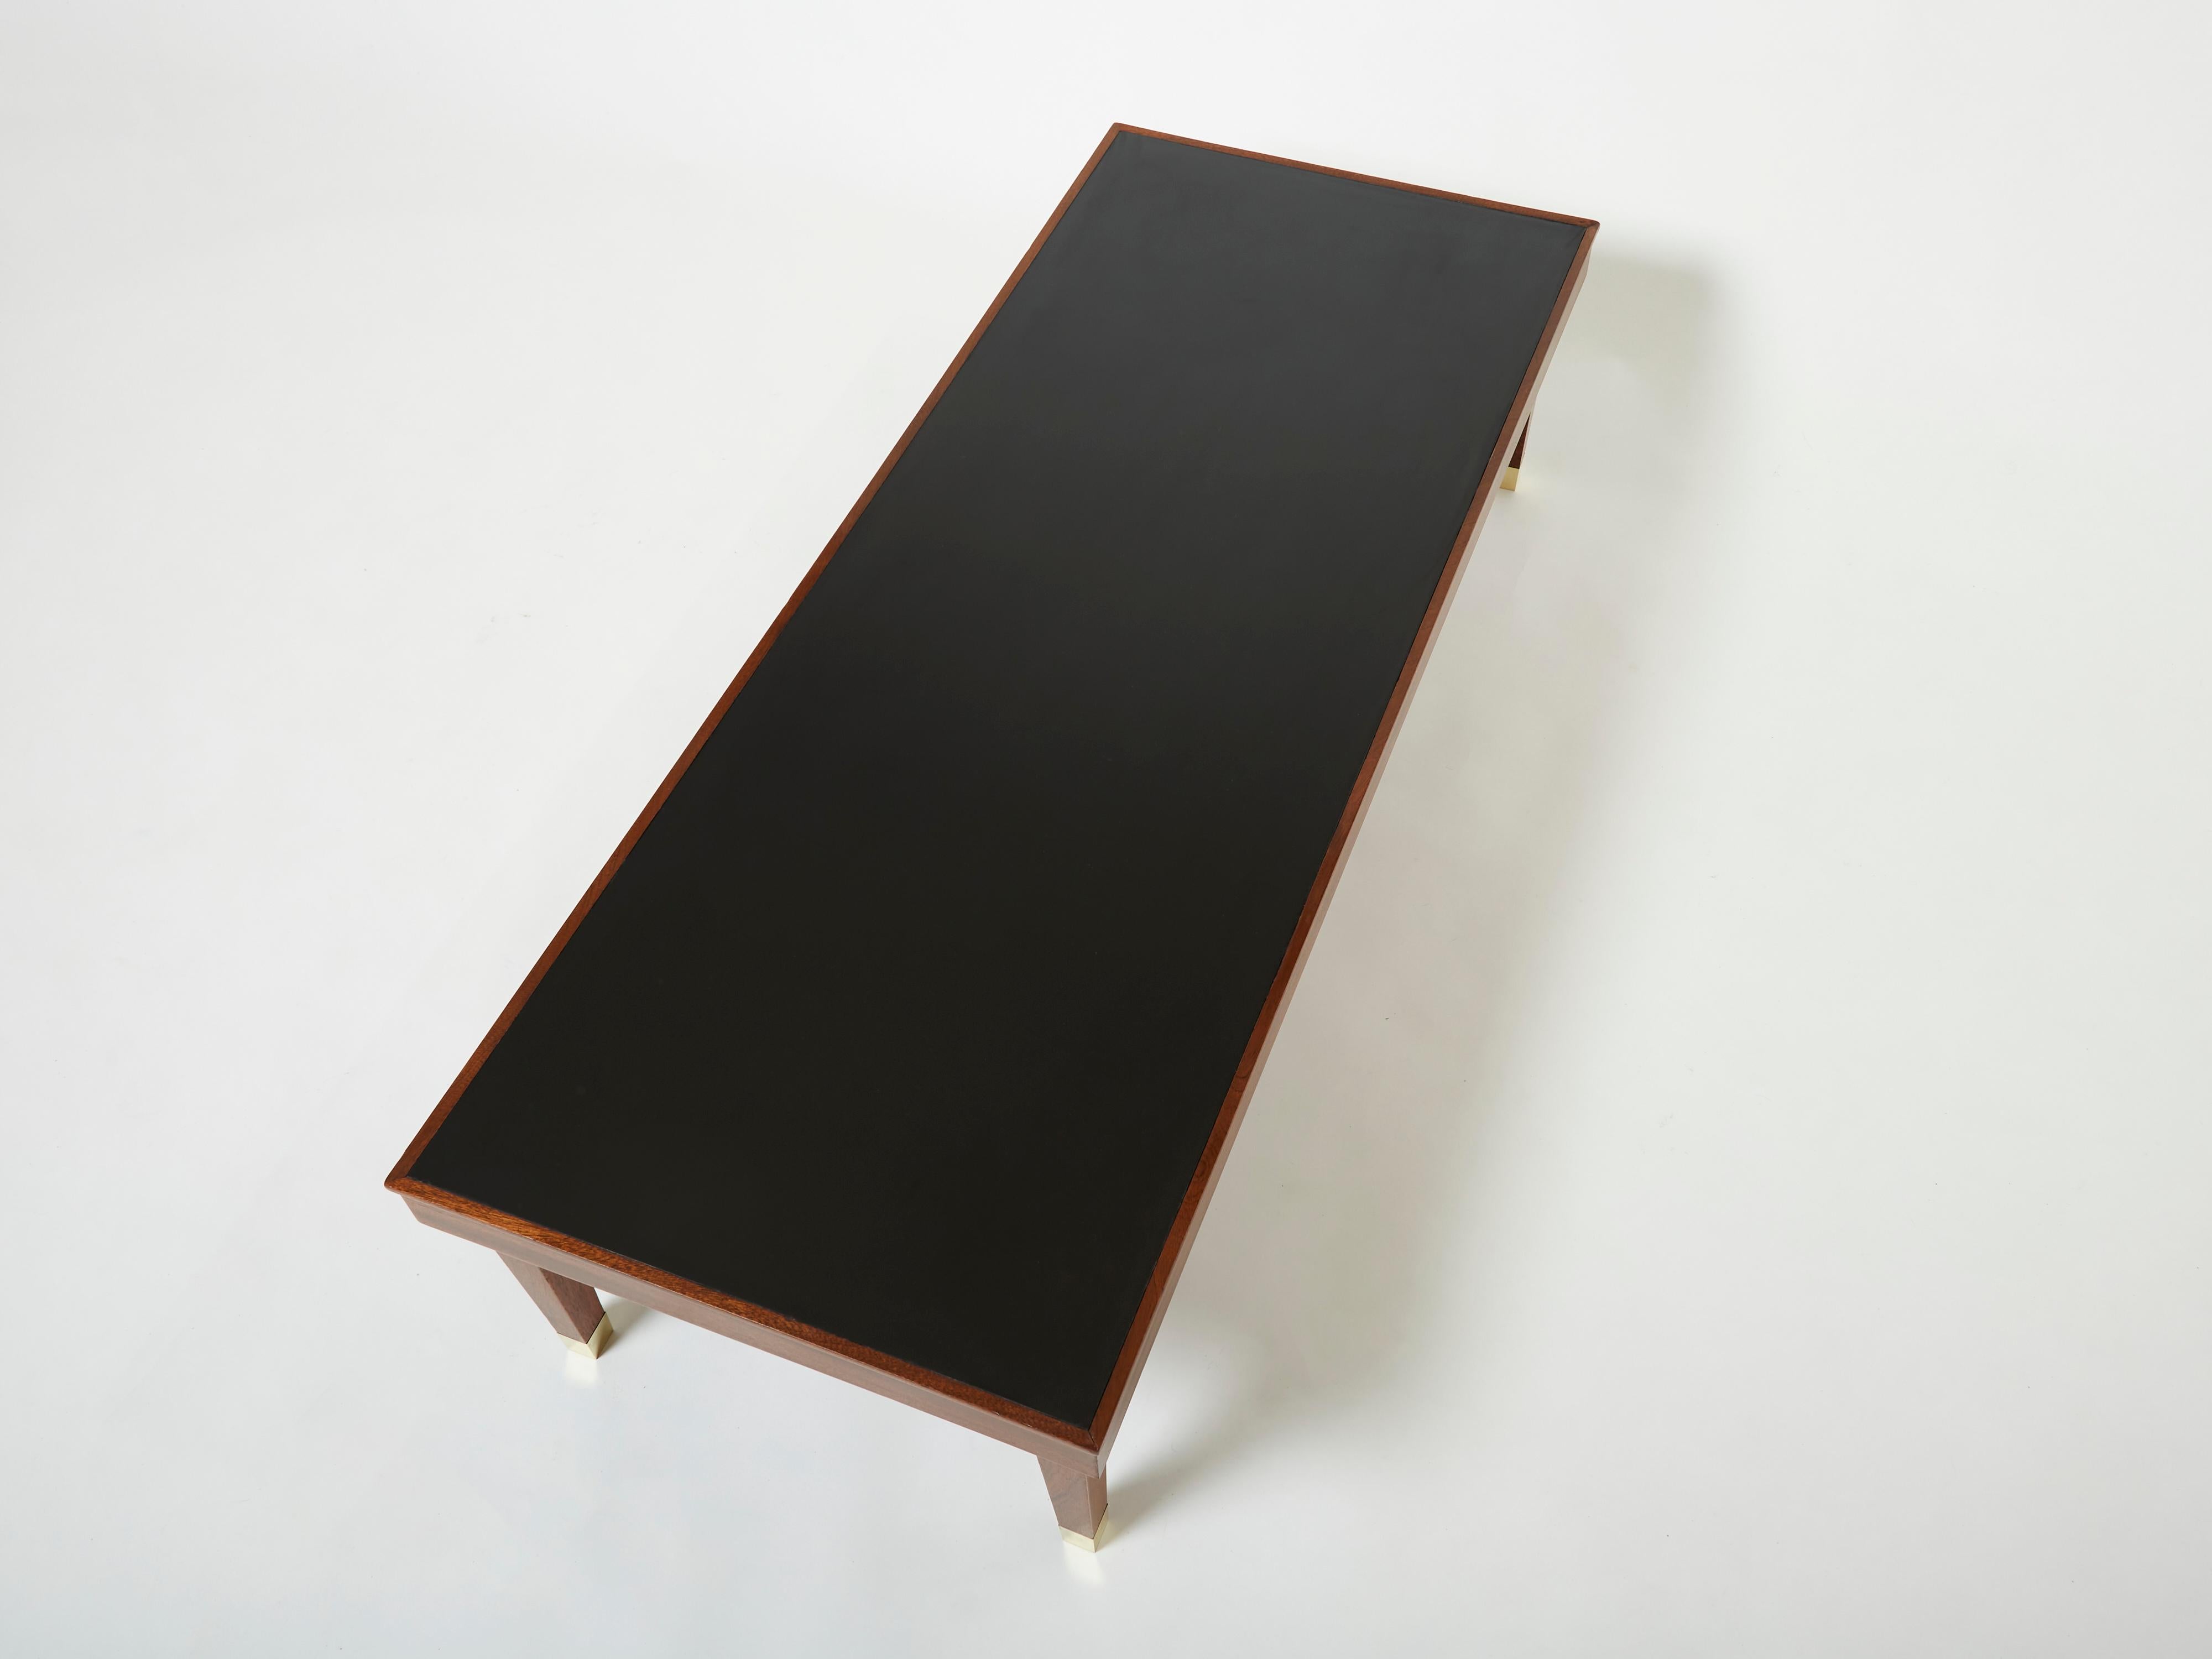 Jacques Adnet Mahogany Brass Modernist Coffee Table, 1950s For Sale 4